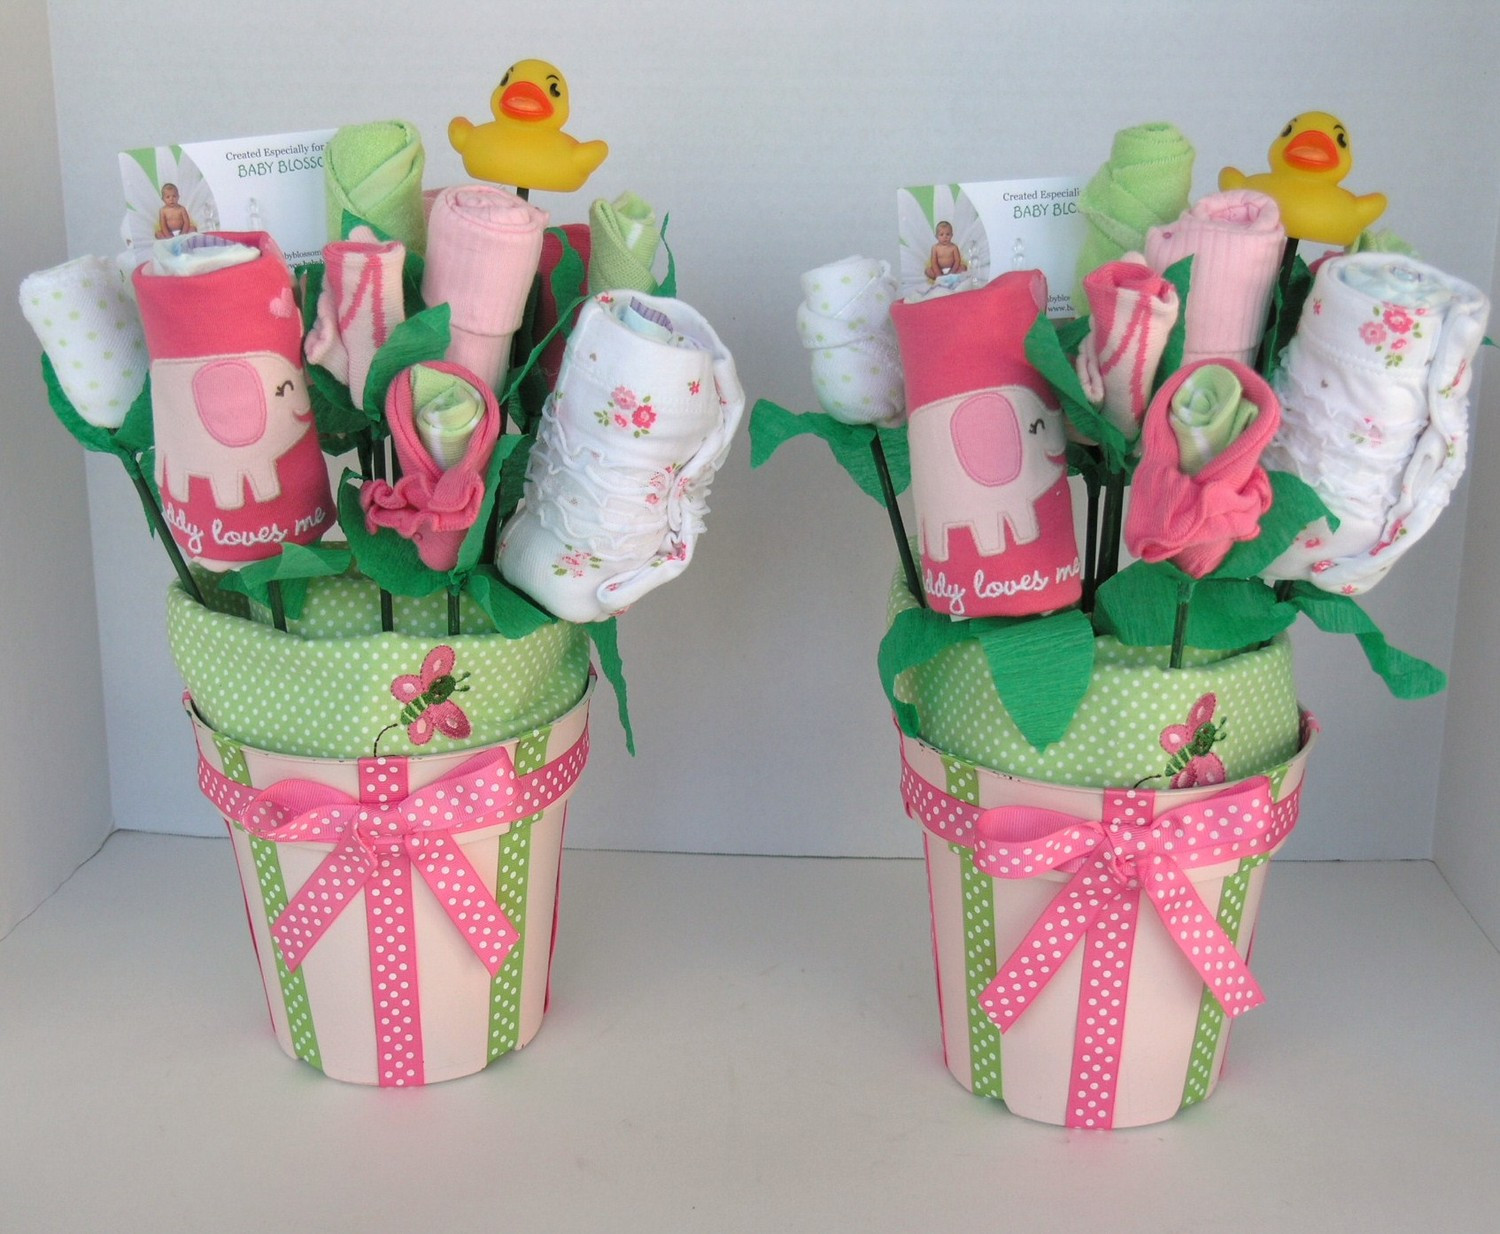 Gift Ideas For A Baby Girl
 Five Best DIY Baby Gifting Ideas for The Little Special